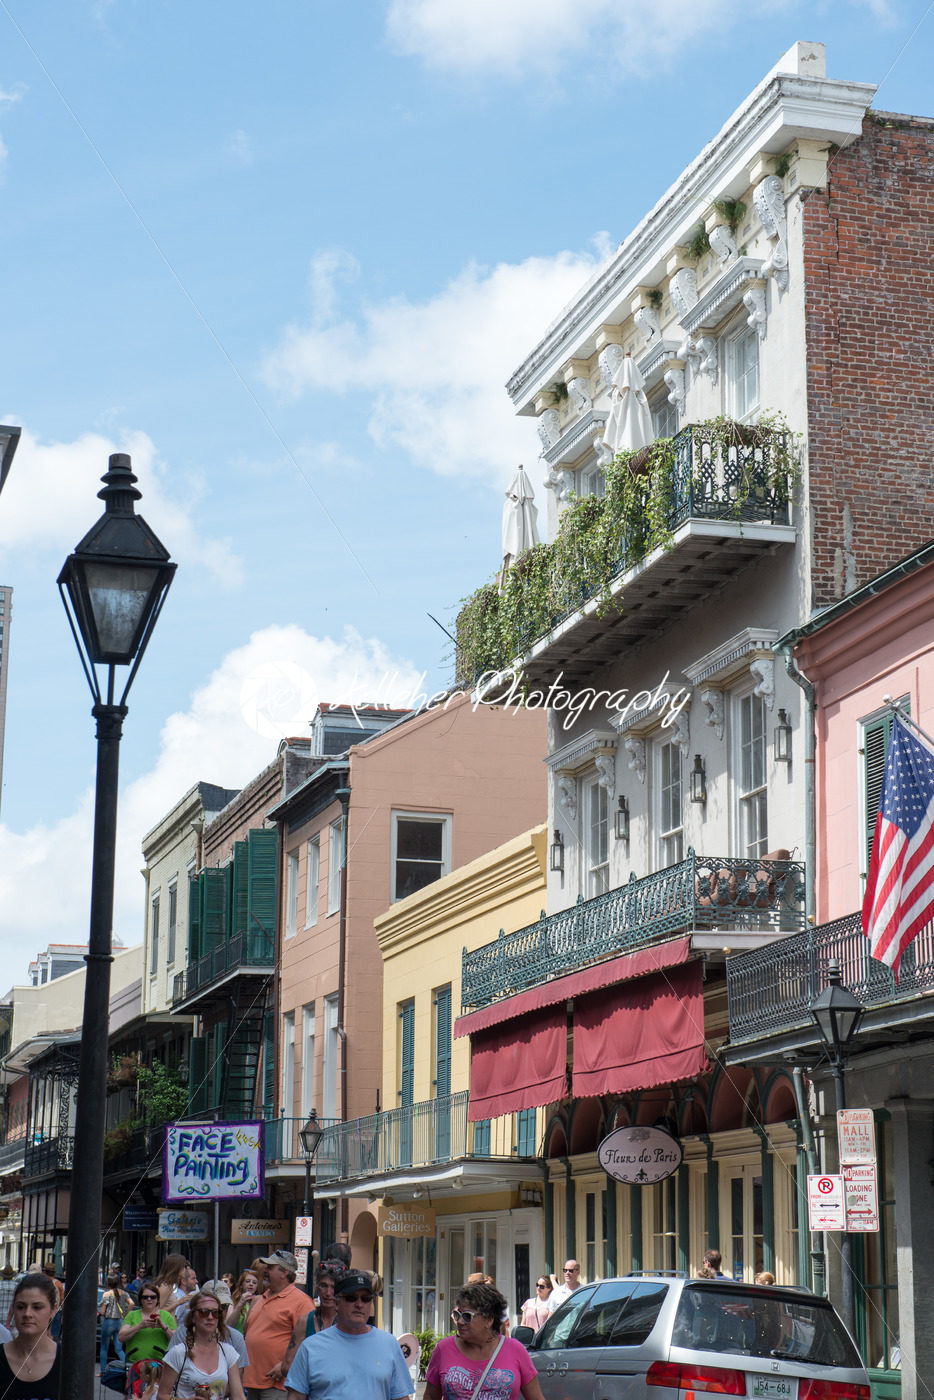 NEW ORLEANS, LA – APRIL 13: Street in the French Quarter of New Orleans, Louisiana showing historic buldings with unique architecture on April 13, 2014 - Kelleher Photography Store